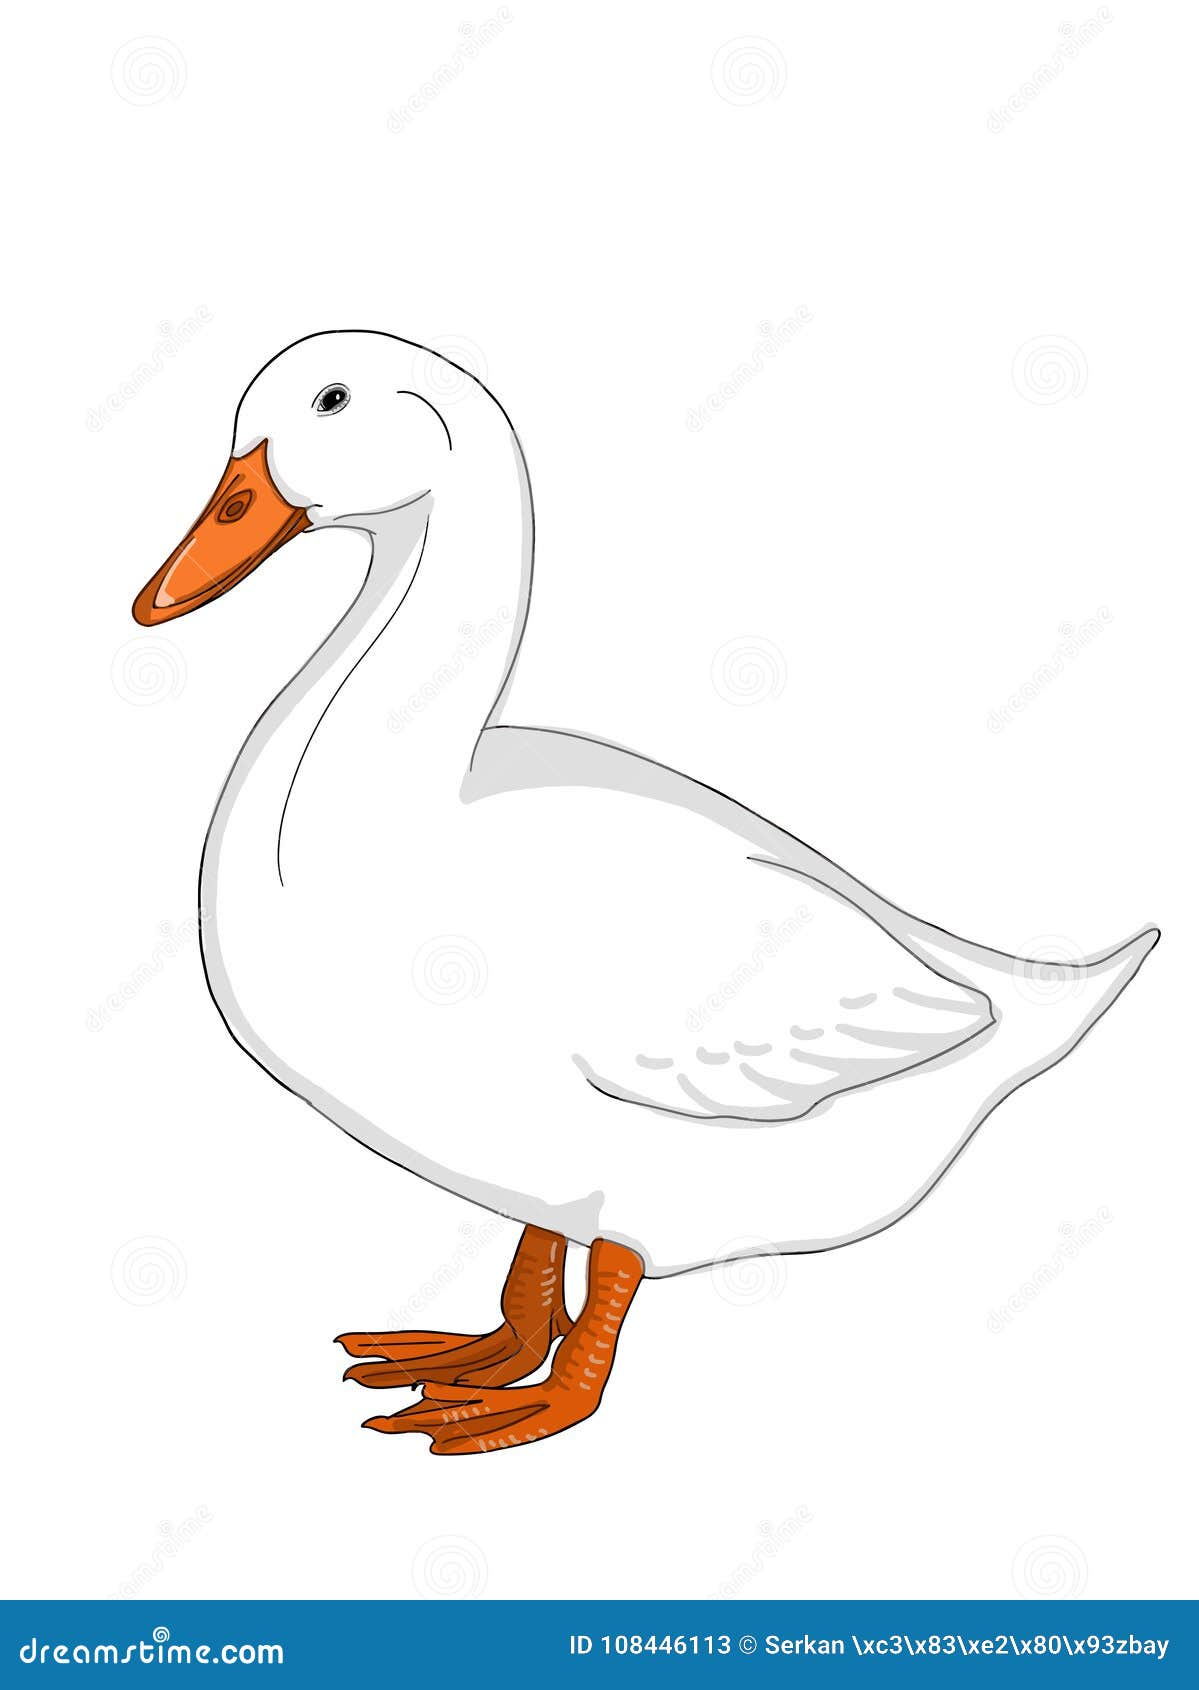 Duck Drawing Vector Art Icons and Graphics for Free Download